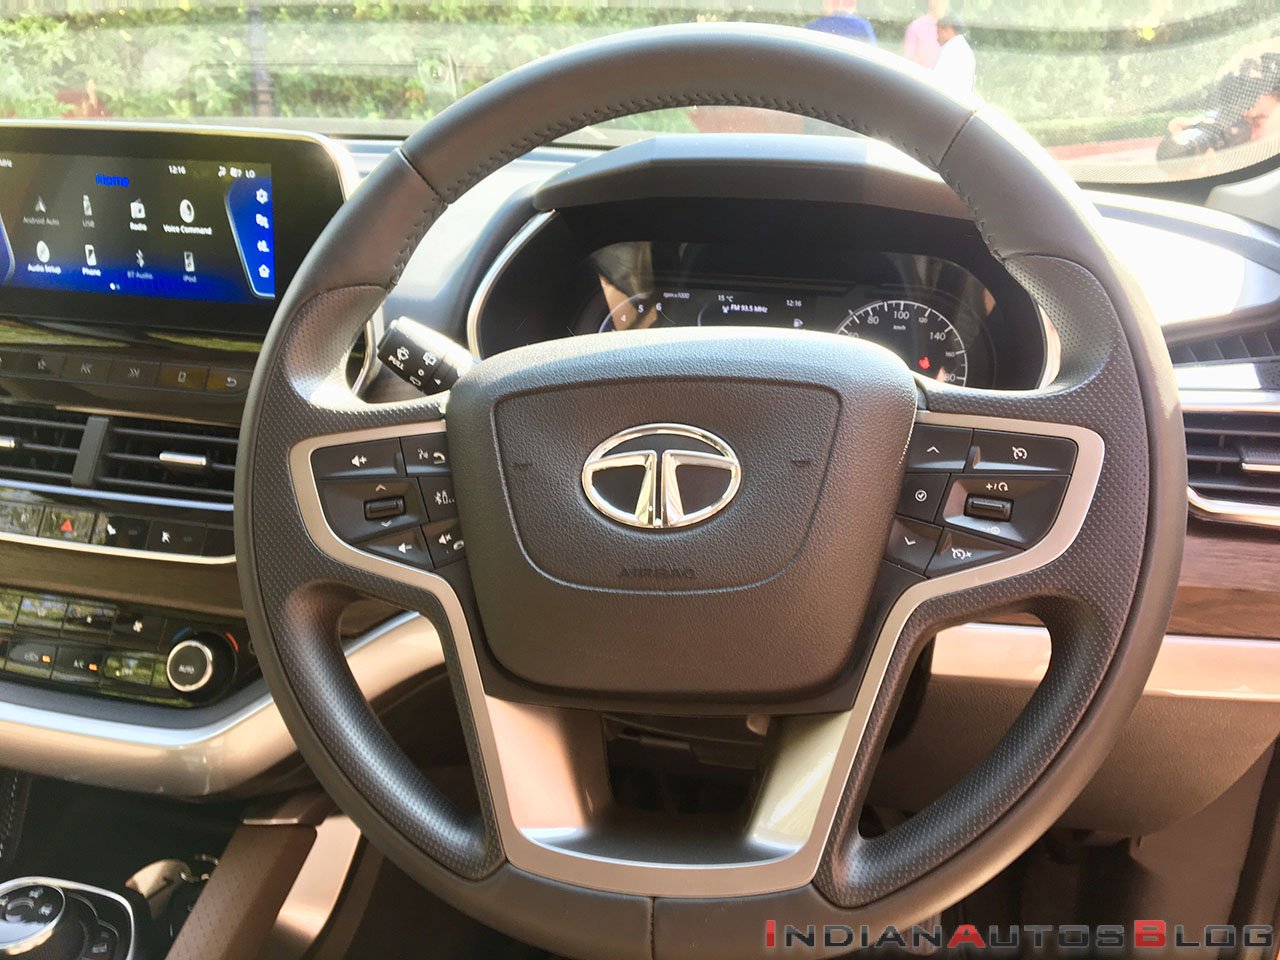 Tata Harrier dashboard and instrument console